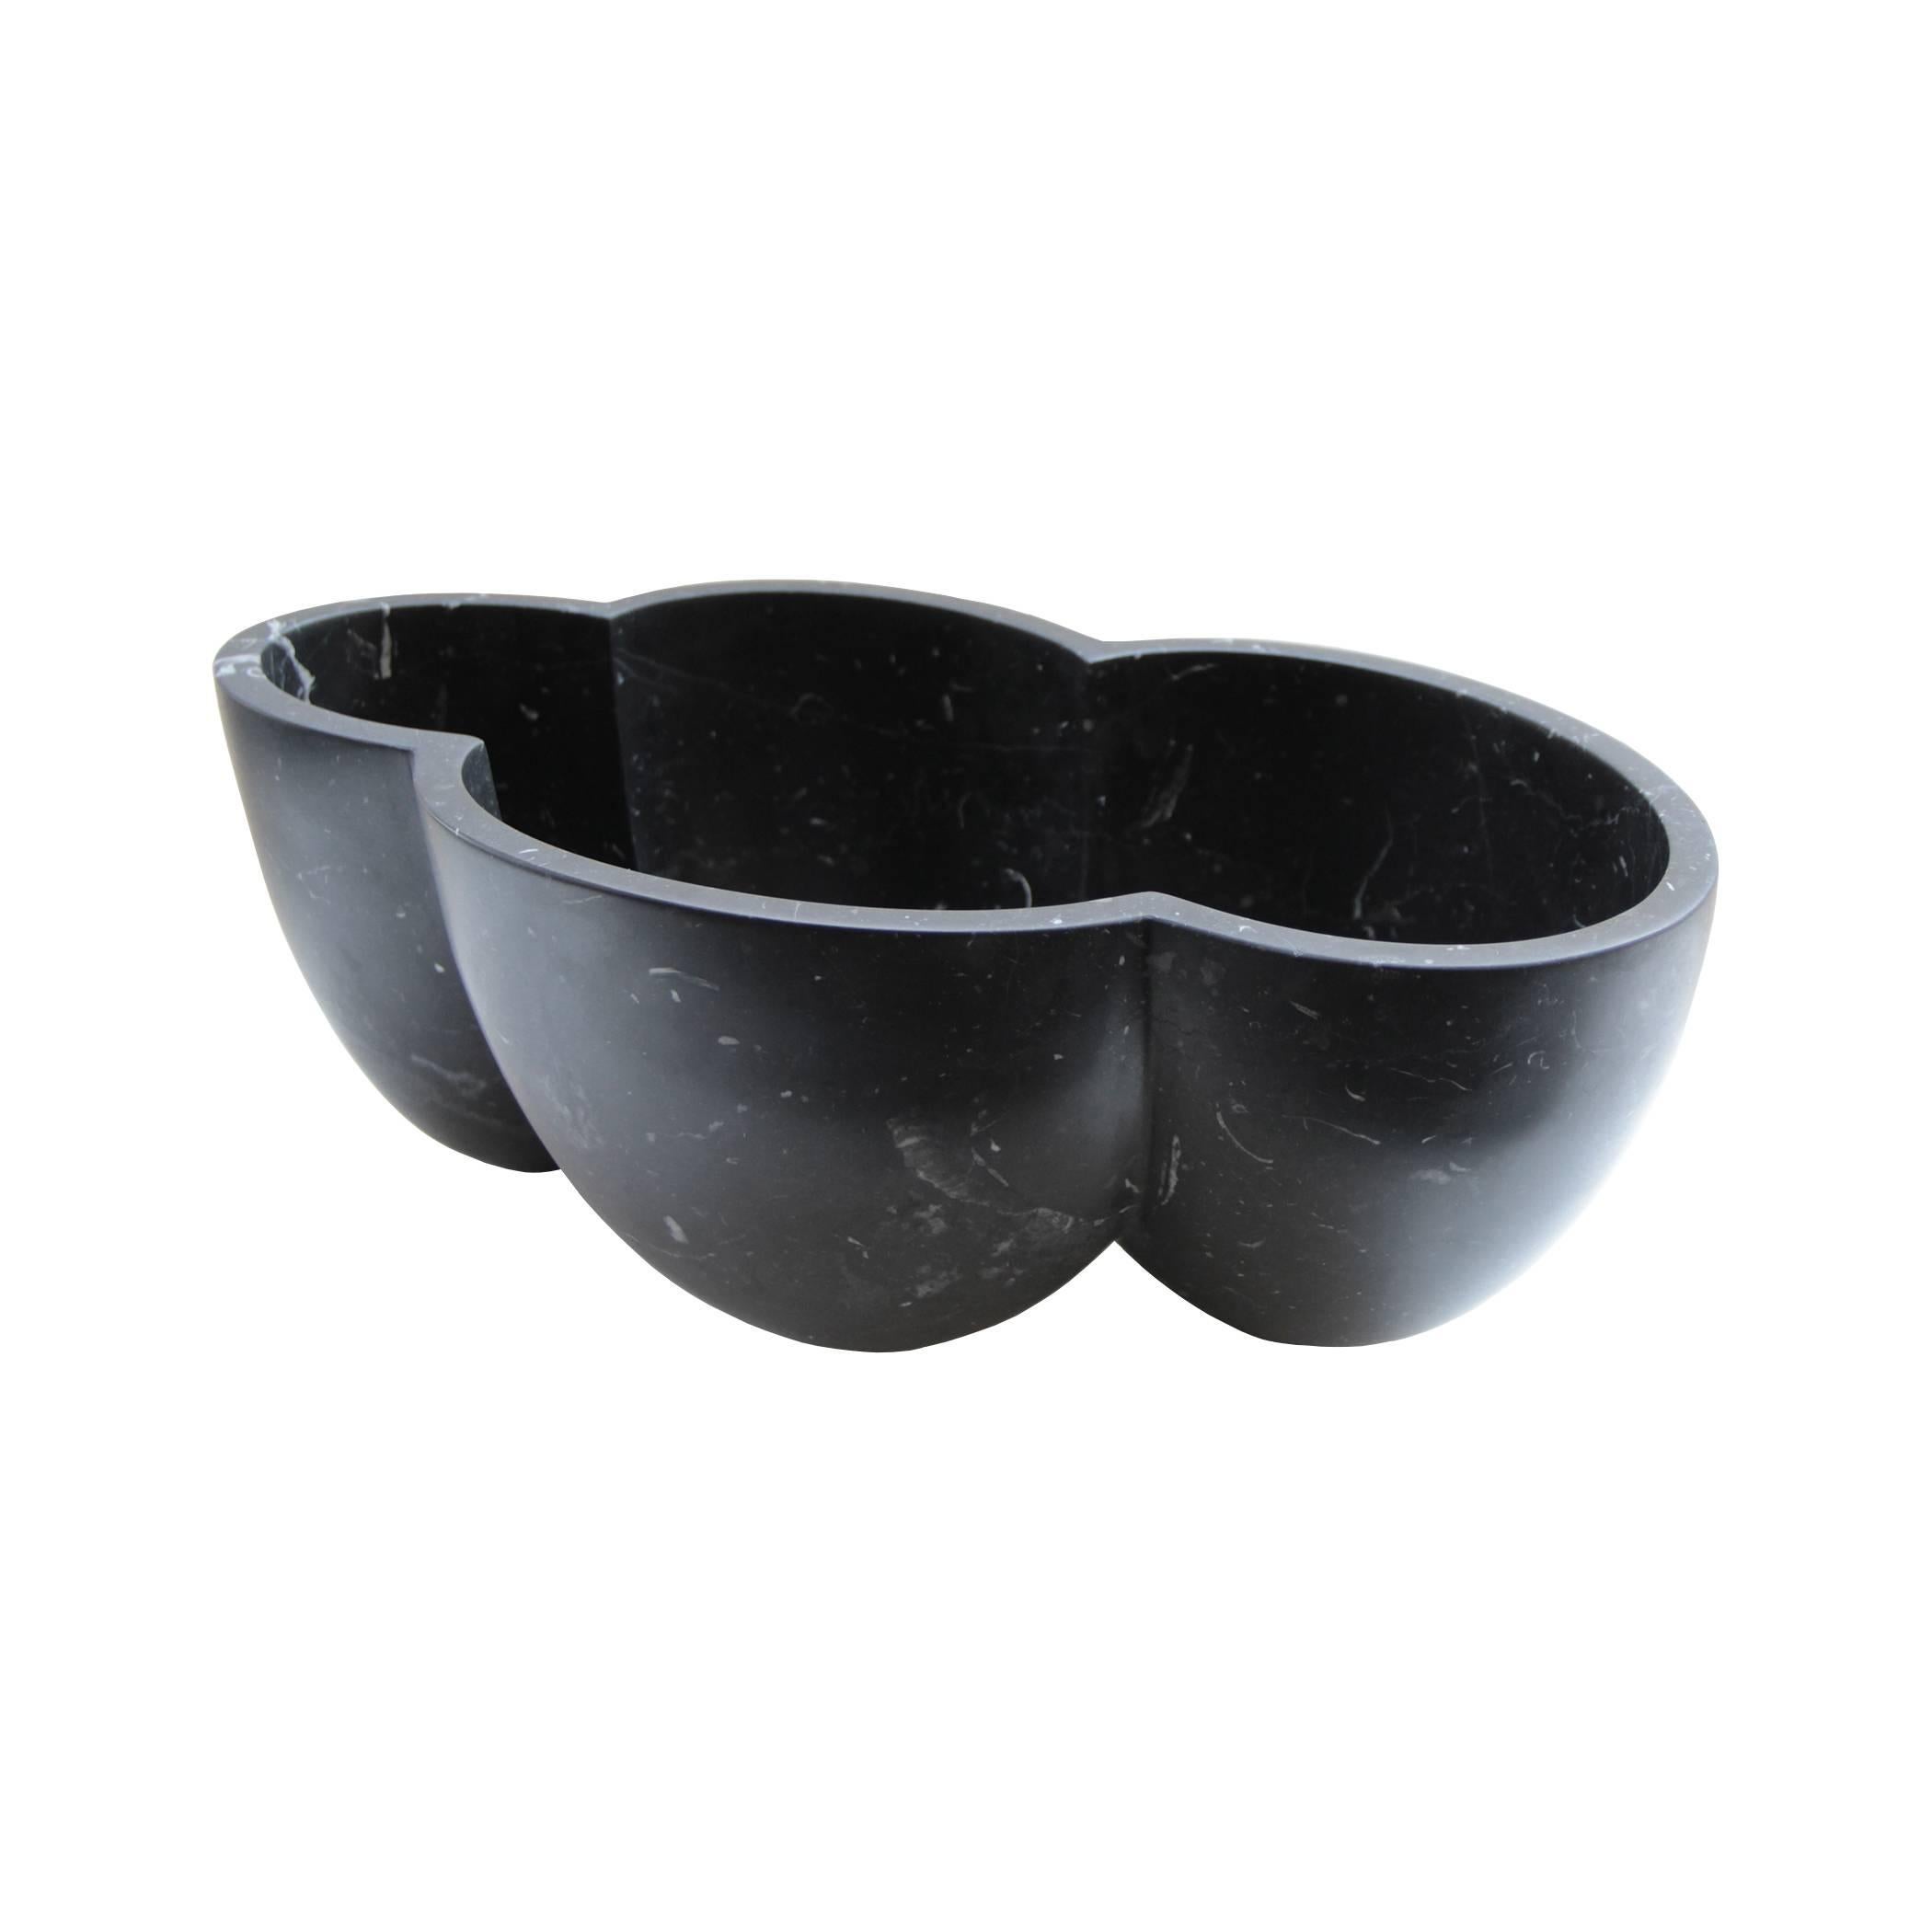 Nube Honed Black Marble Vessel Bowl DLeuci Studio Contemporary Decorative Object In Excellent Condition For Sale In Brooklyn, NY